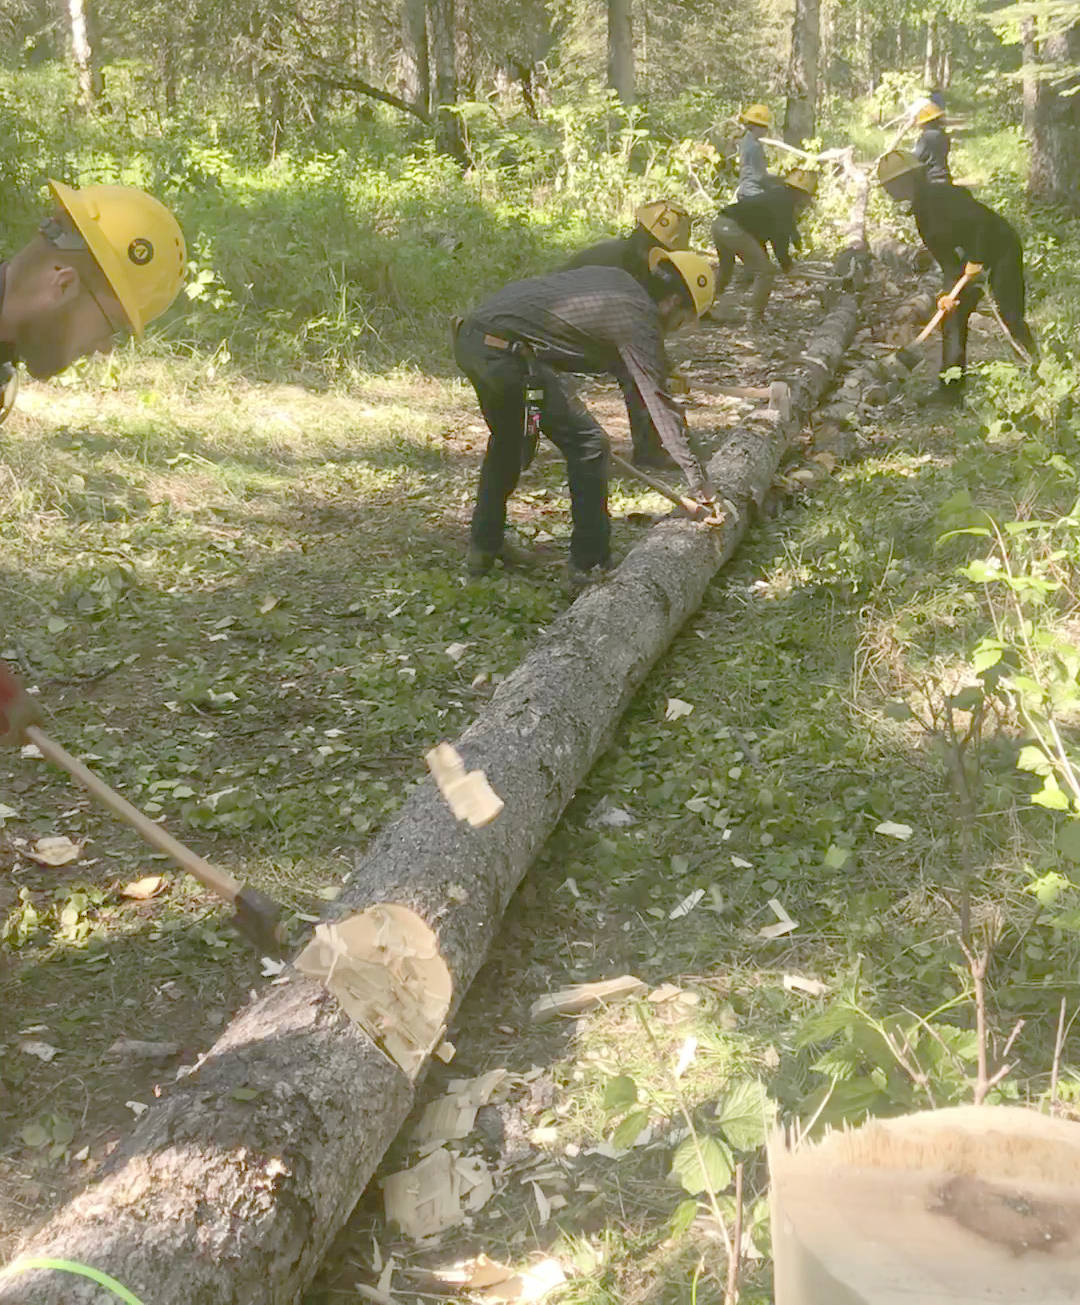 Student Conservation Association crewmembers work with axes and a crosscut saw to remove a tree from Pollard Horse Trail in 2019. (Photo provided by Kenai National Wildlife Refuge)